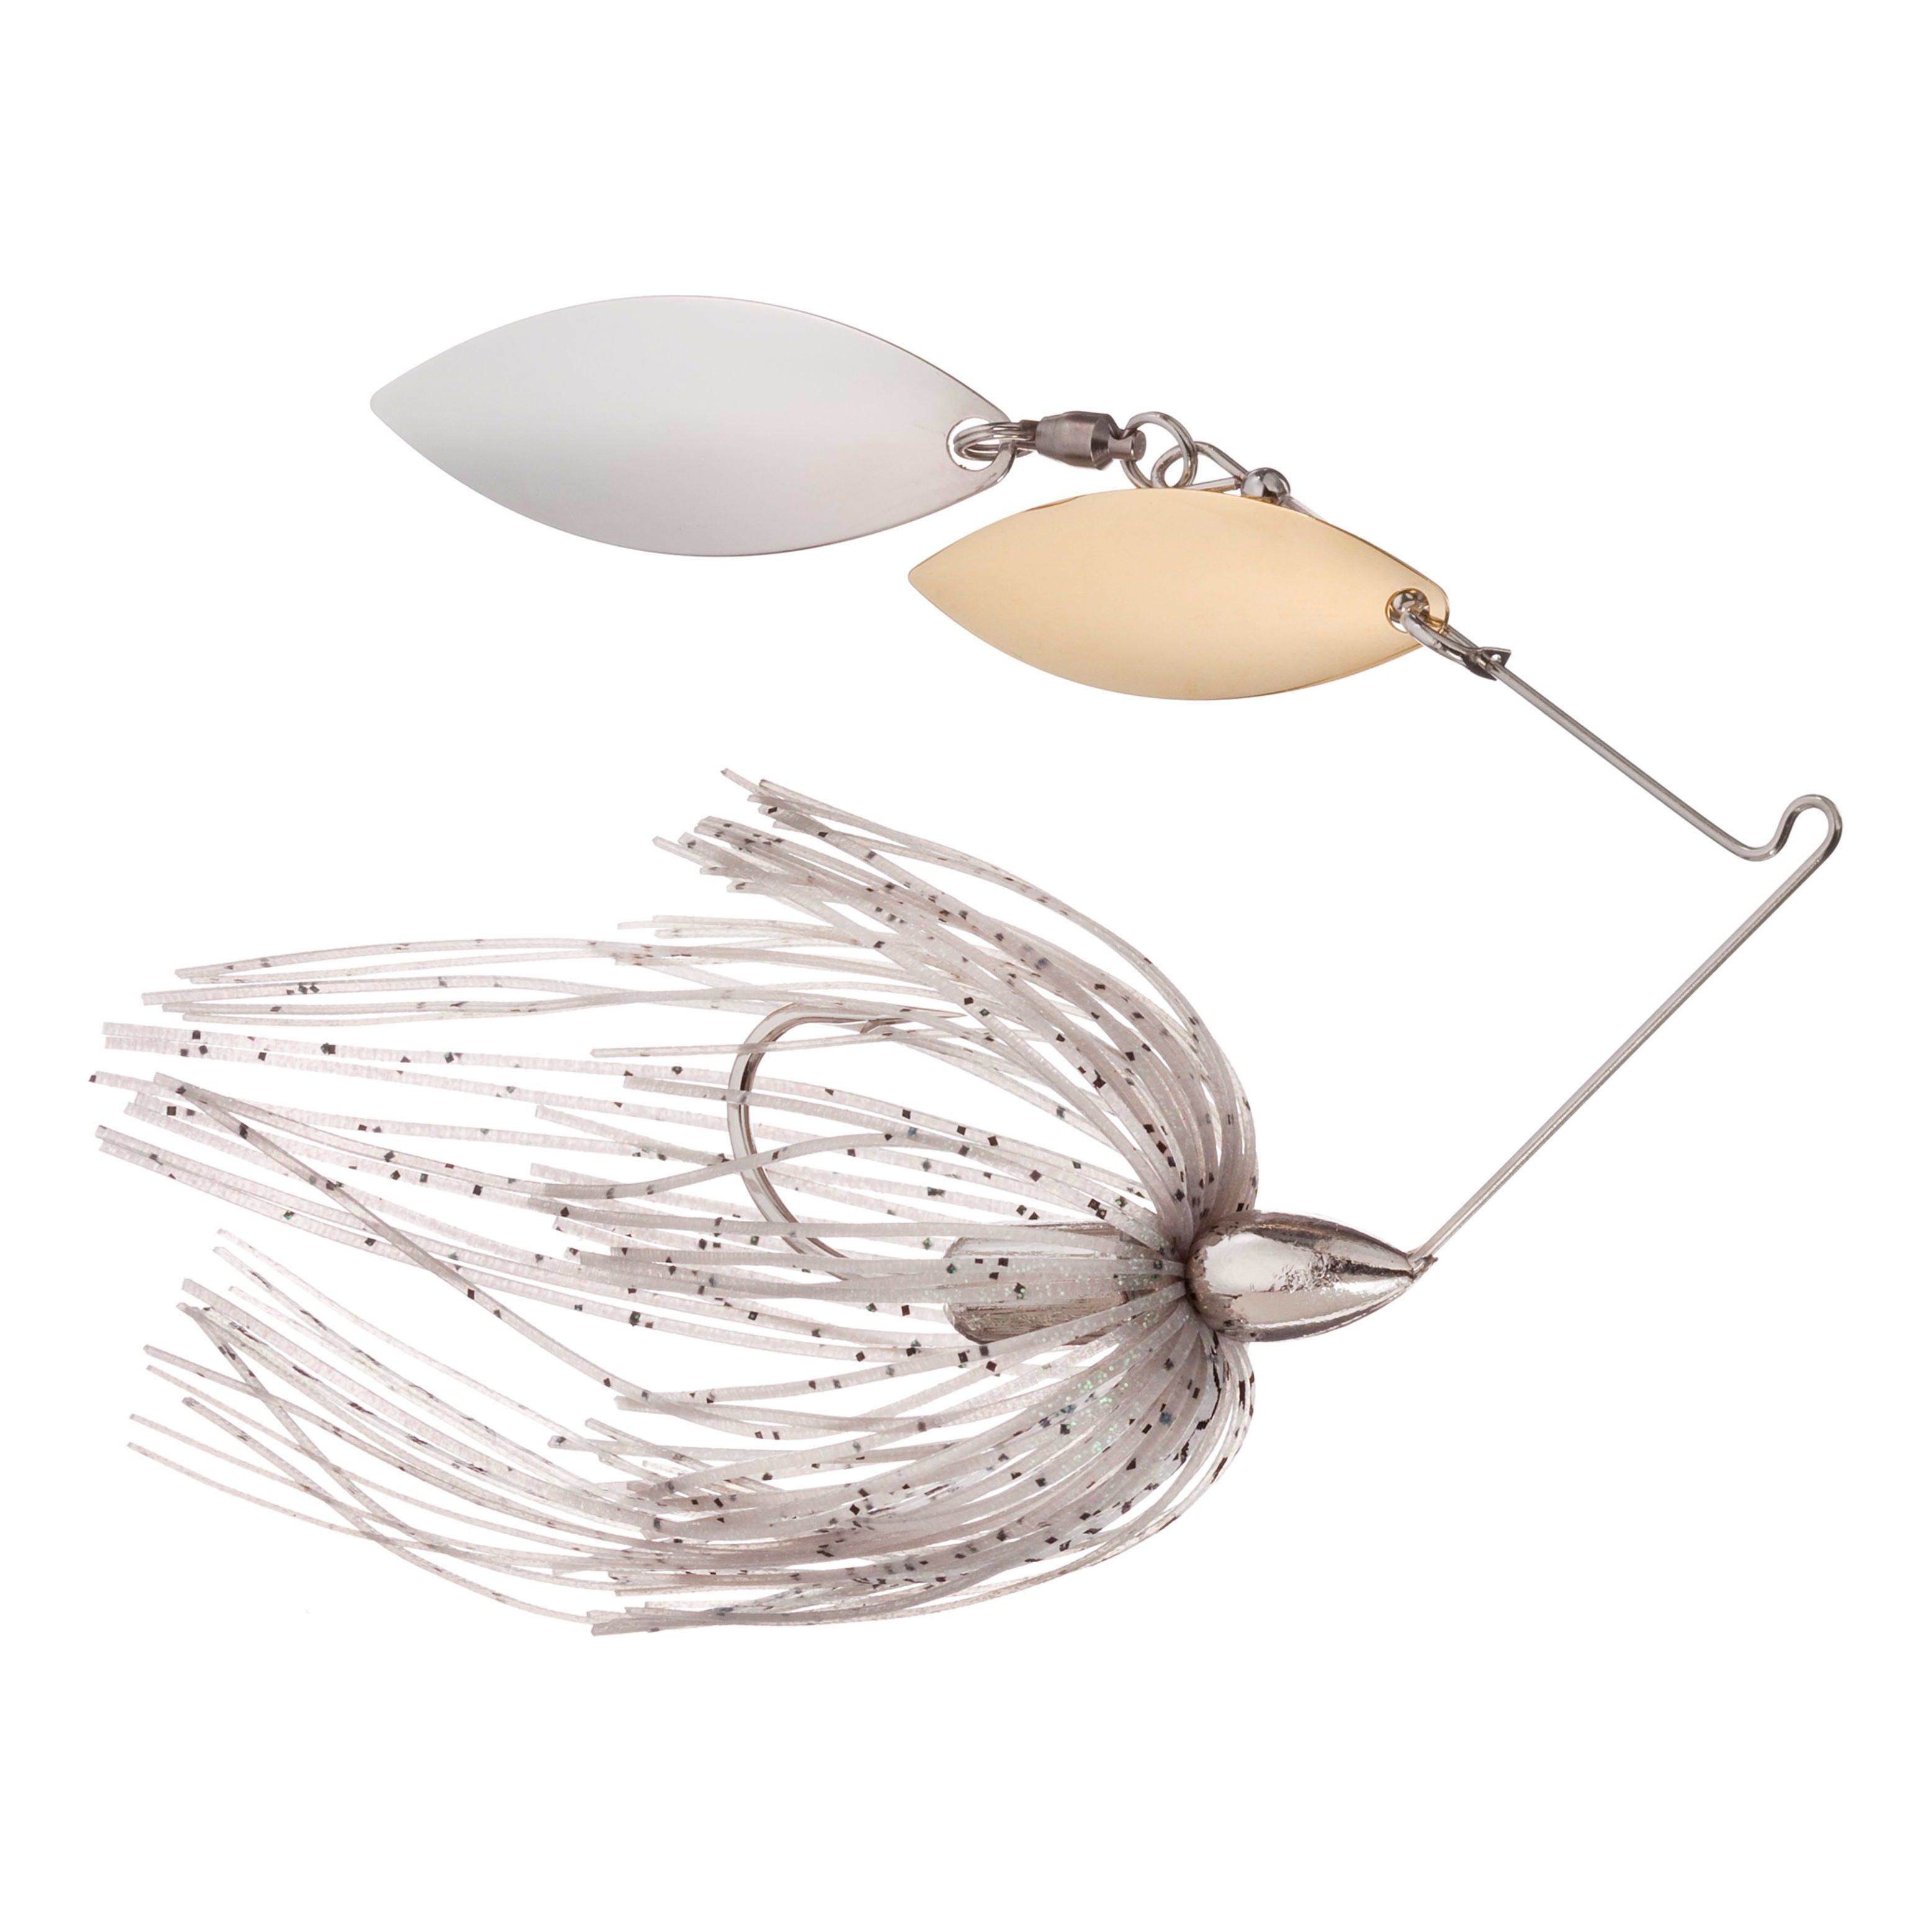 War Eagle Painted Head Double Willow Spinnerbait